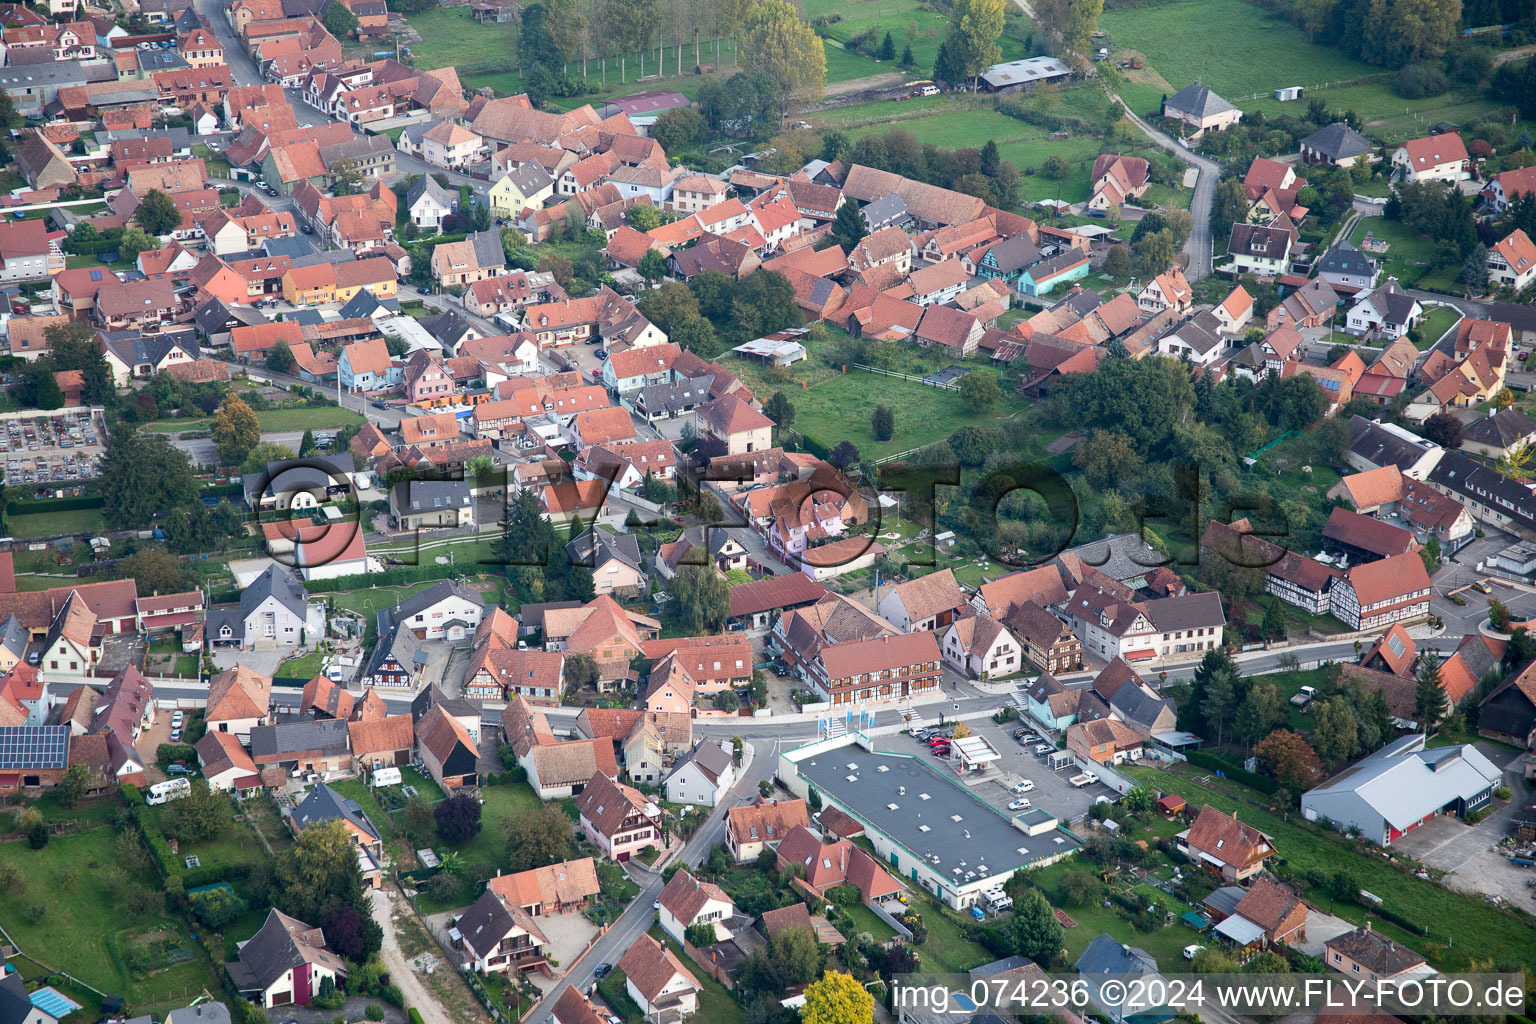 Town View of the streets and houses of the residential areas in Bischwiller in Grand Est, France